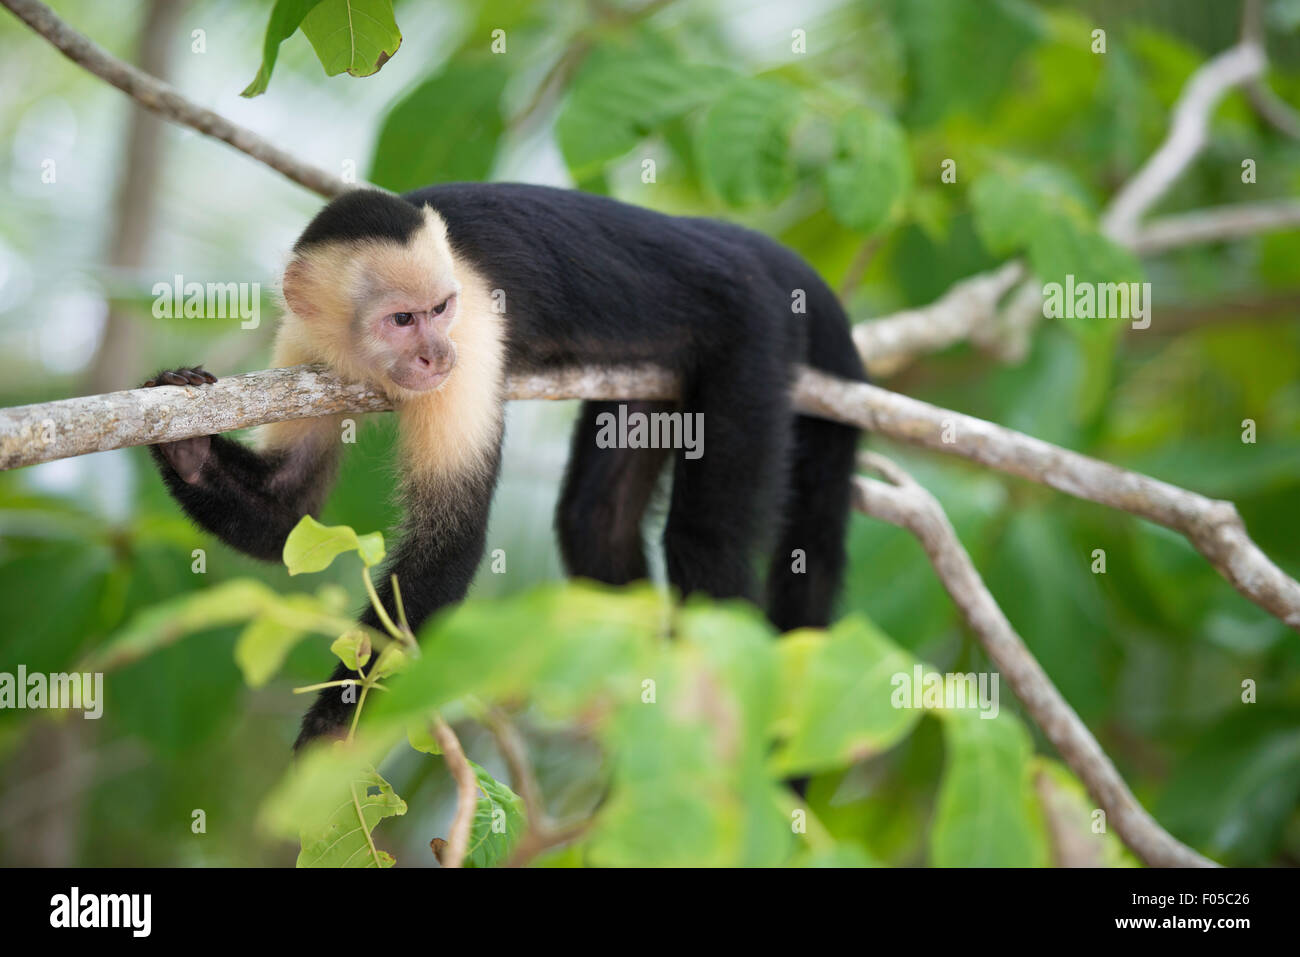 Gracile Capuchin Monkey in a costa Rica tropical forest lying on a tree branch, horizontal image. Stock Photo